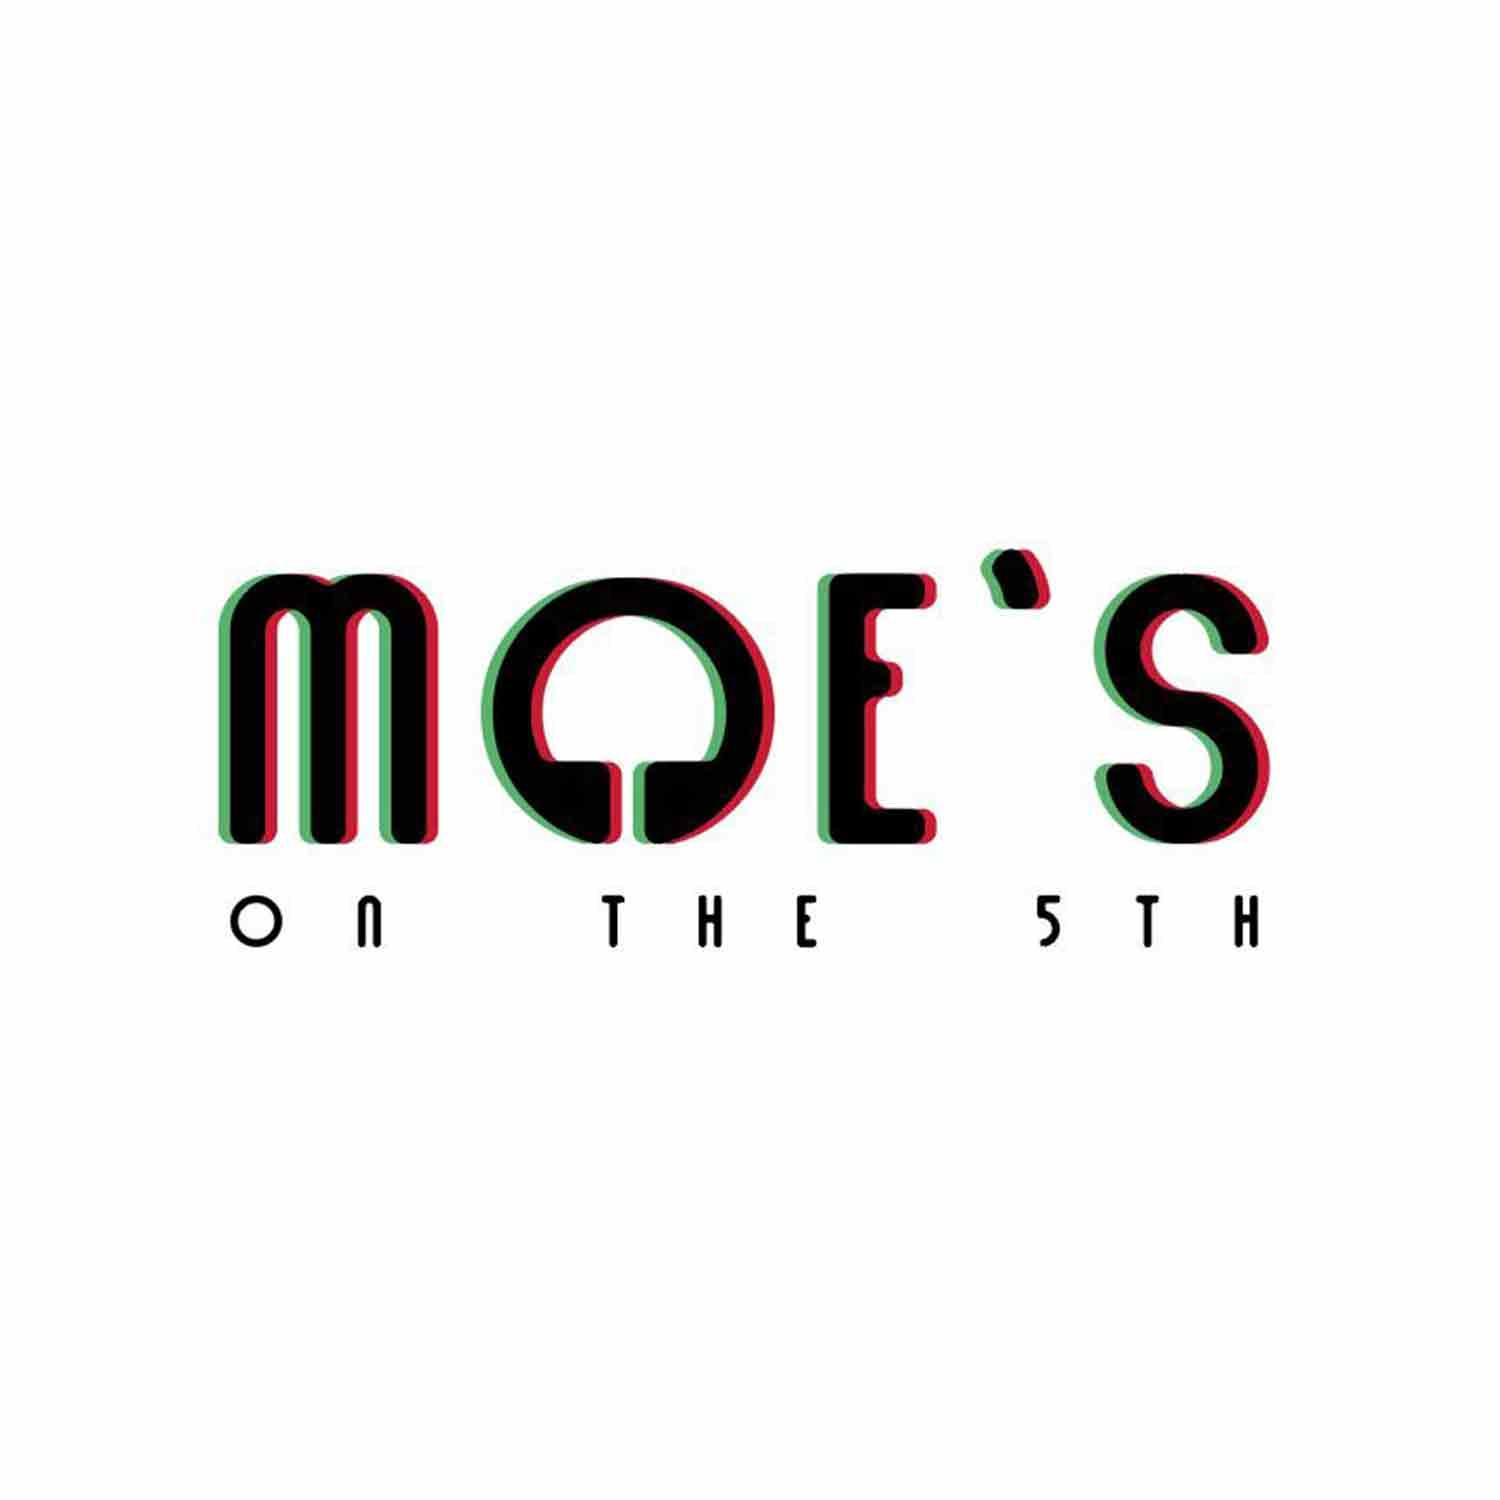 GrapeVynes - Tuesdays at Moe's on the 5th